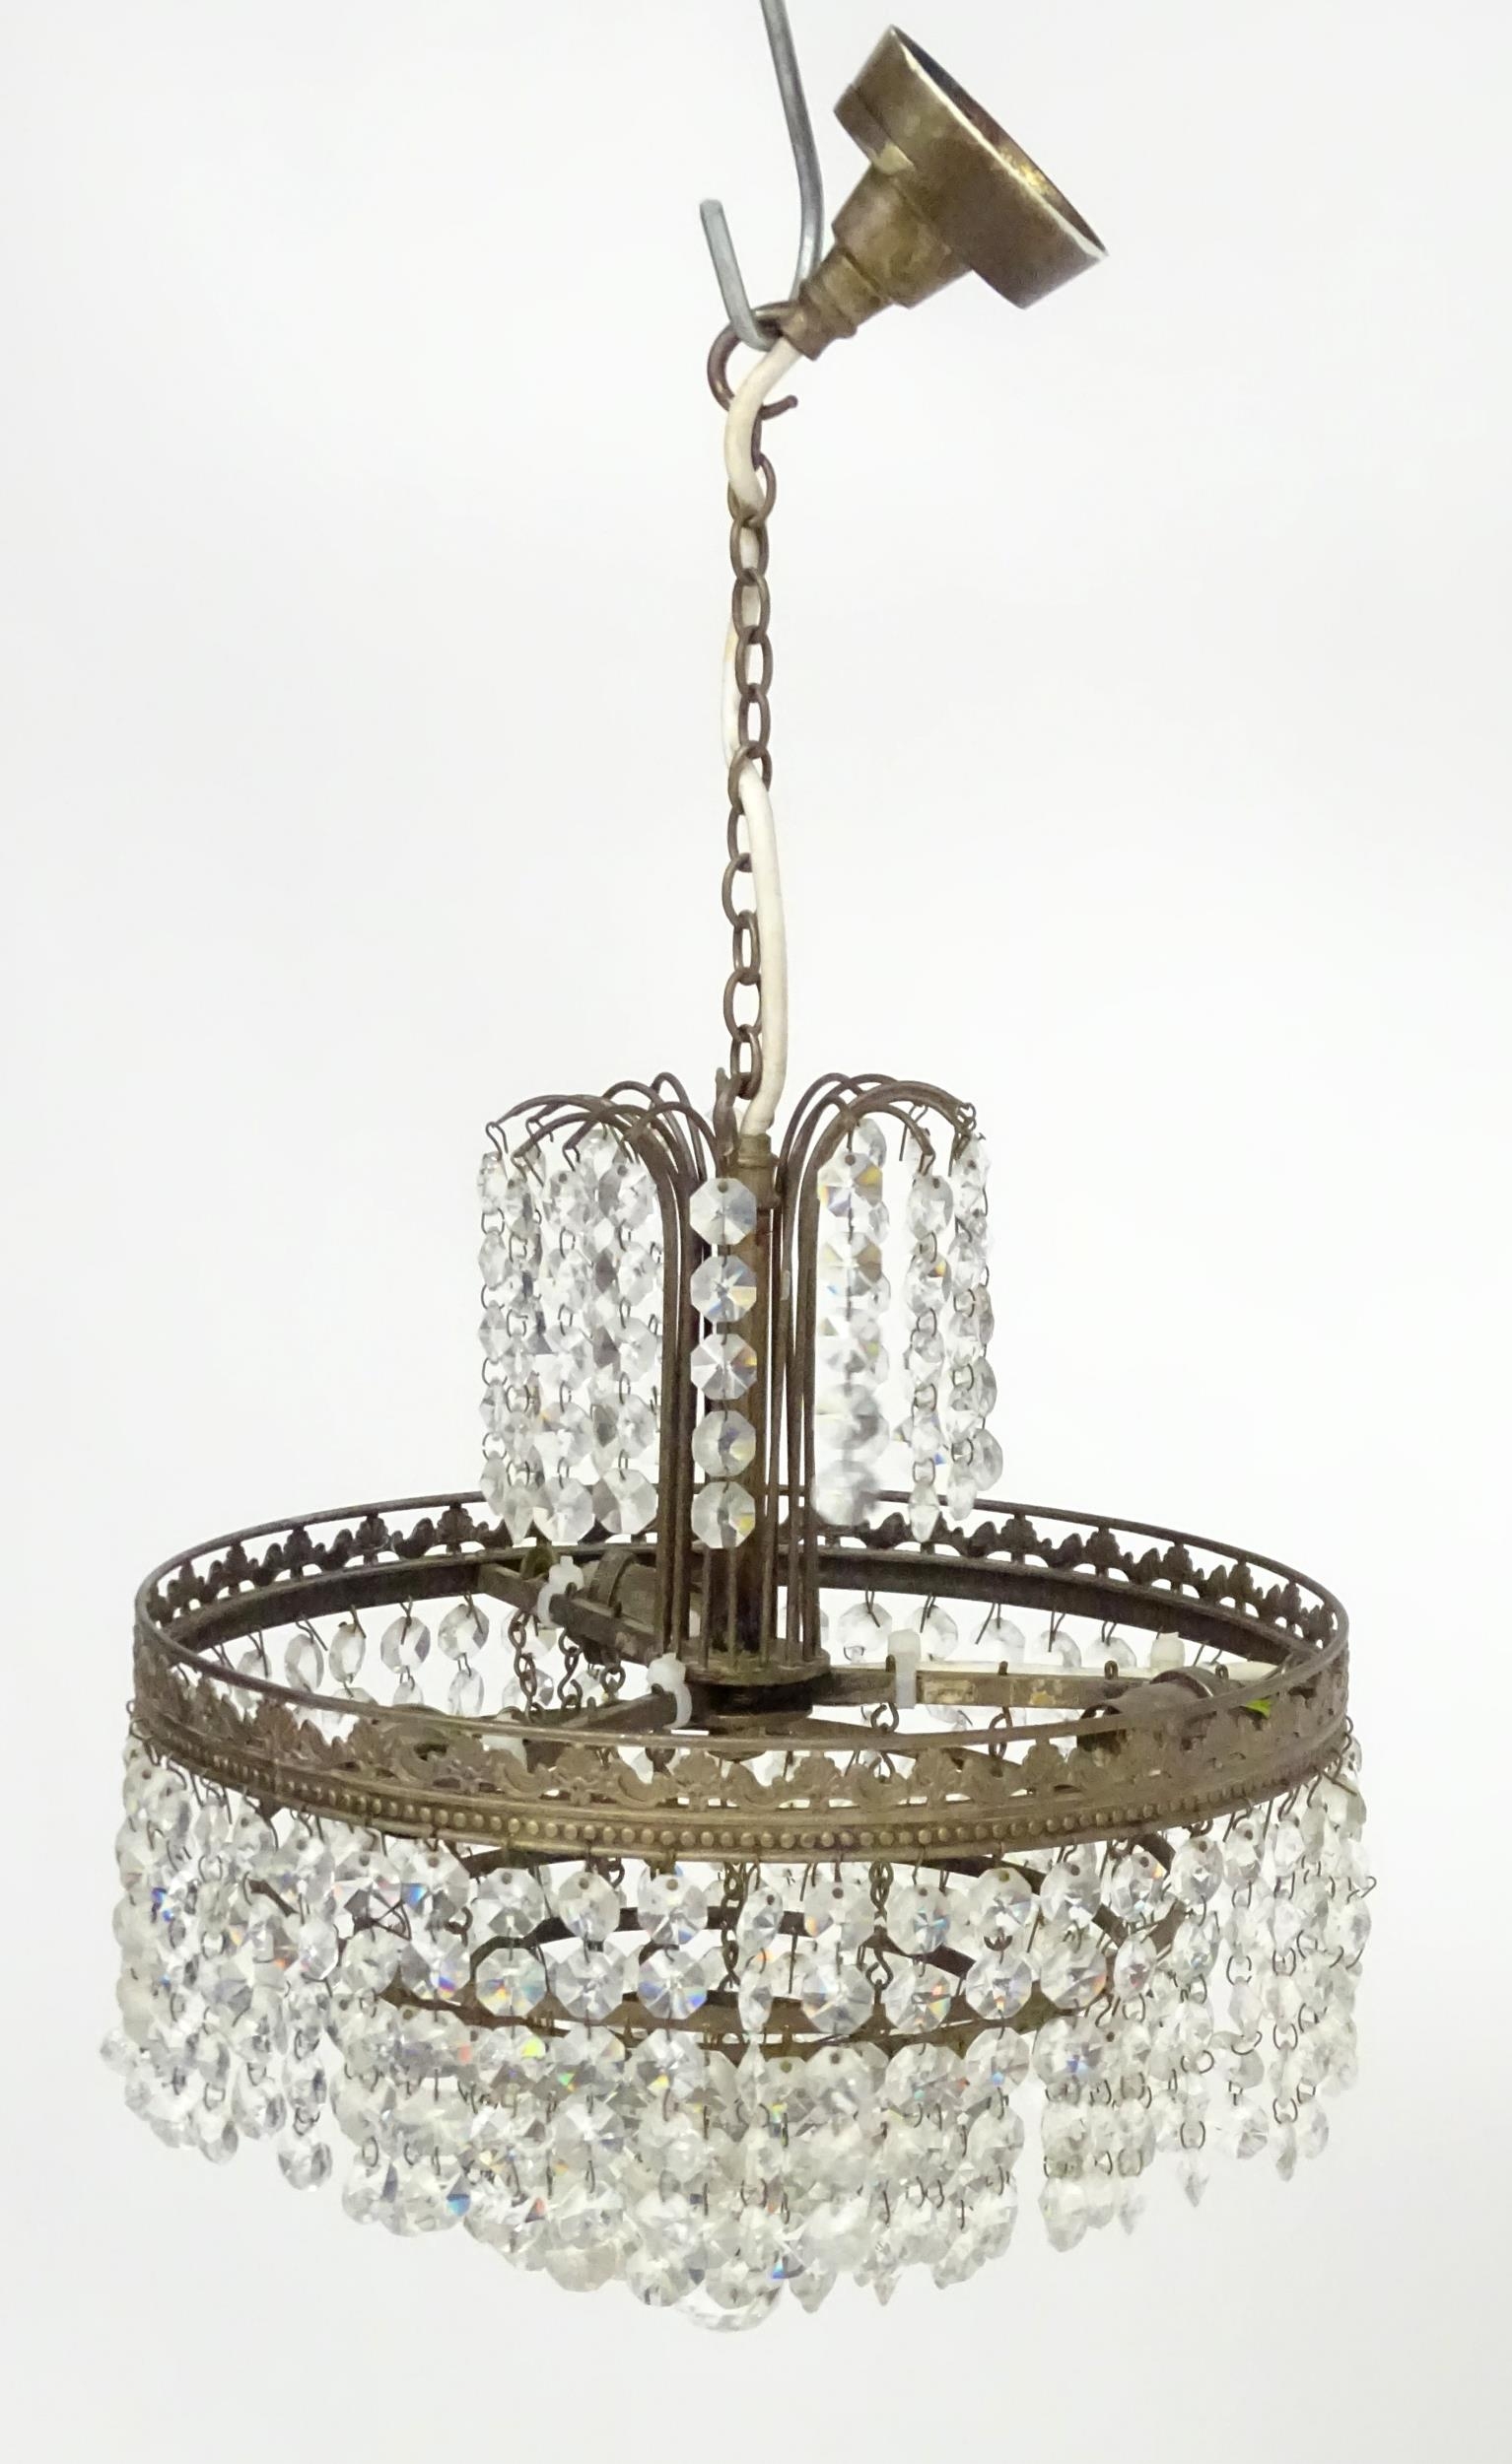 An early 20thC crystal drop bag pendant ceiling light, the chain supporting brass mounts with a - Image 3 of 8